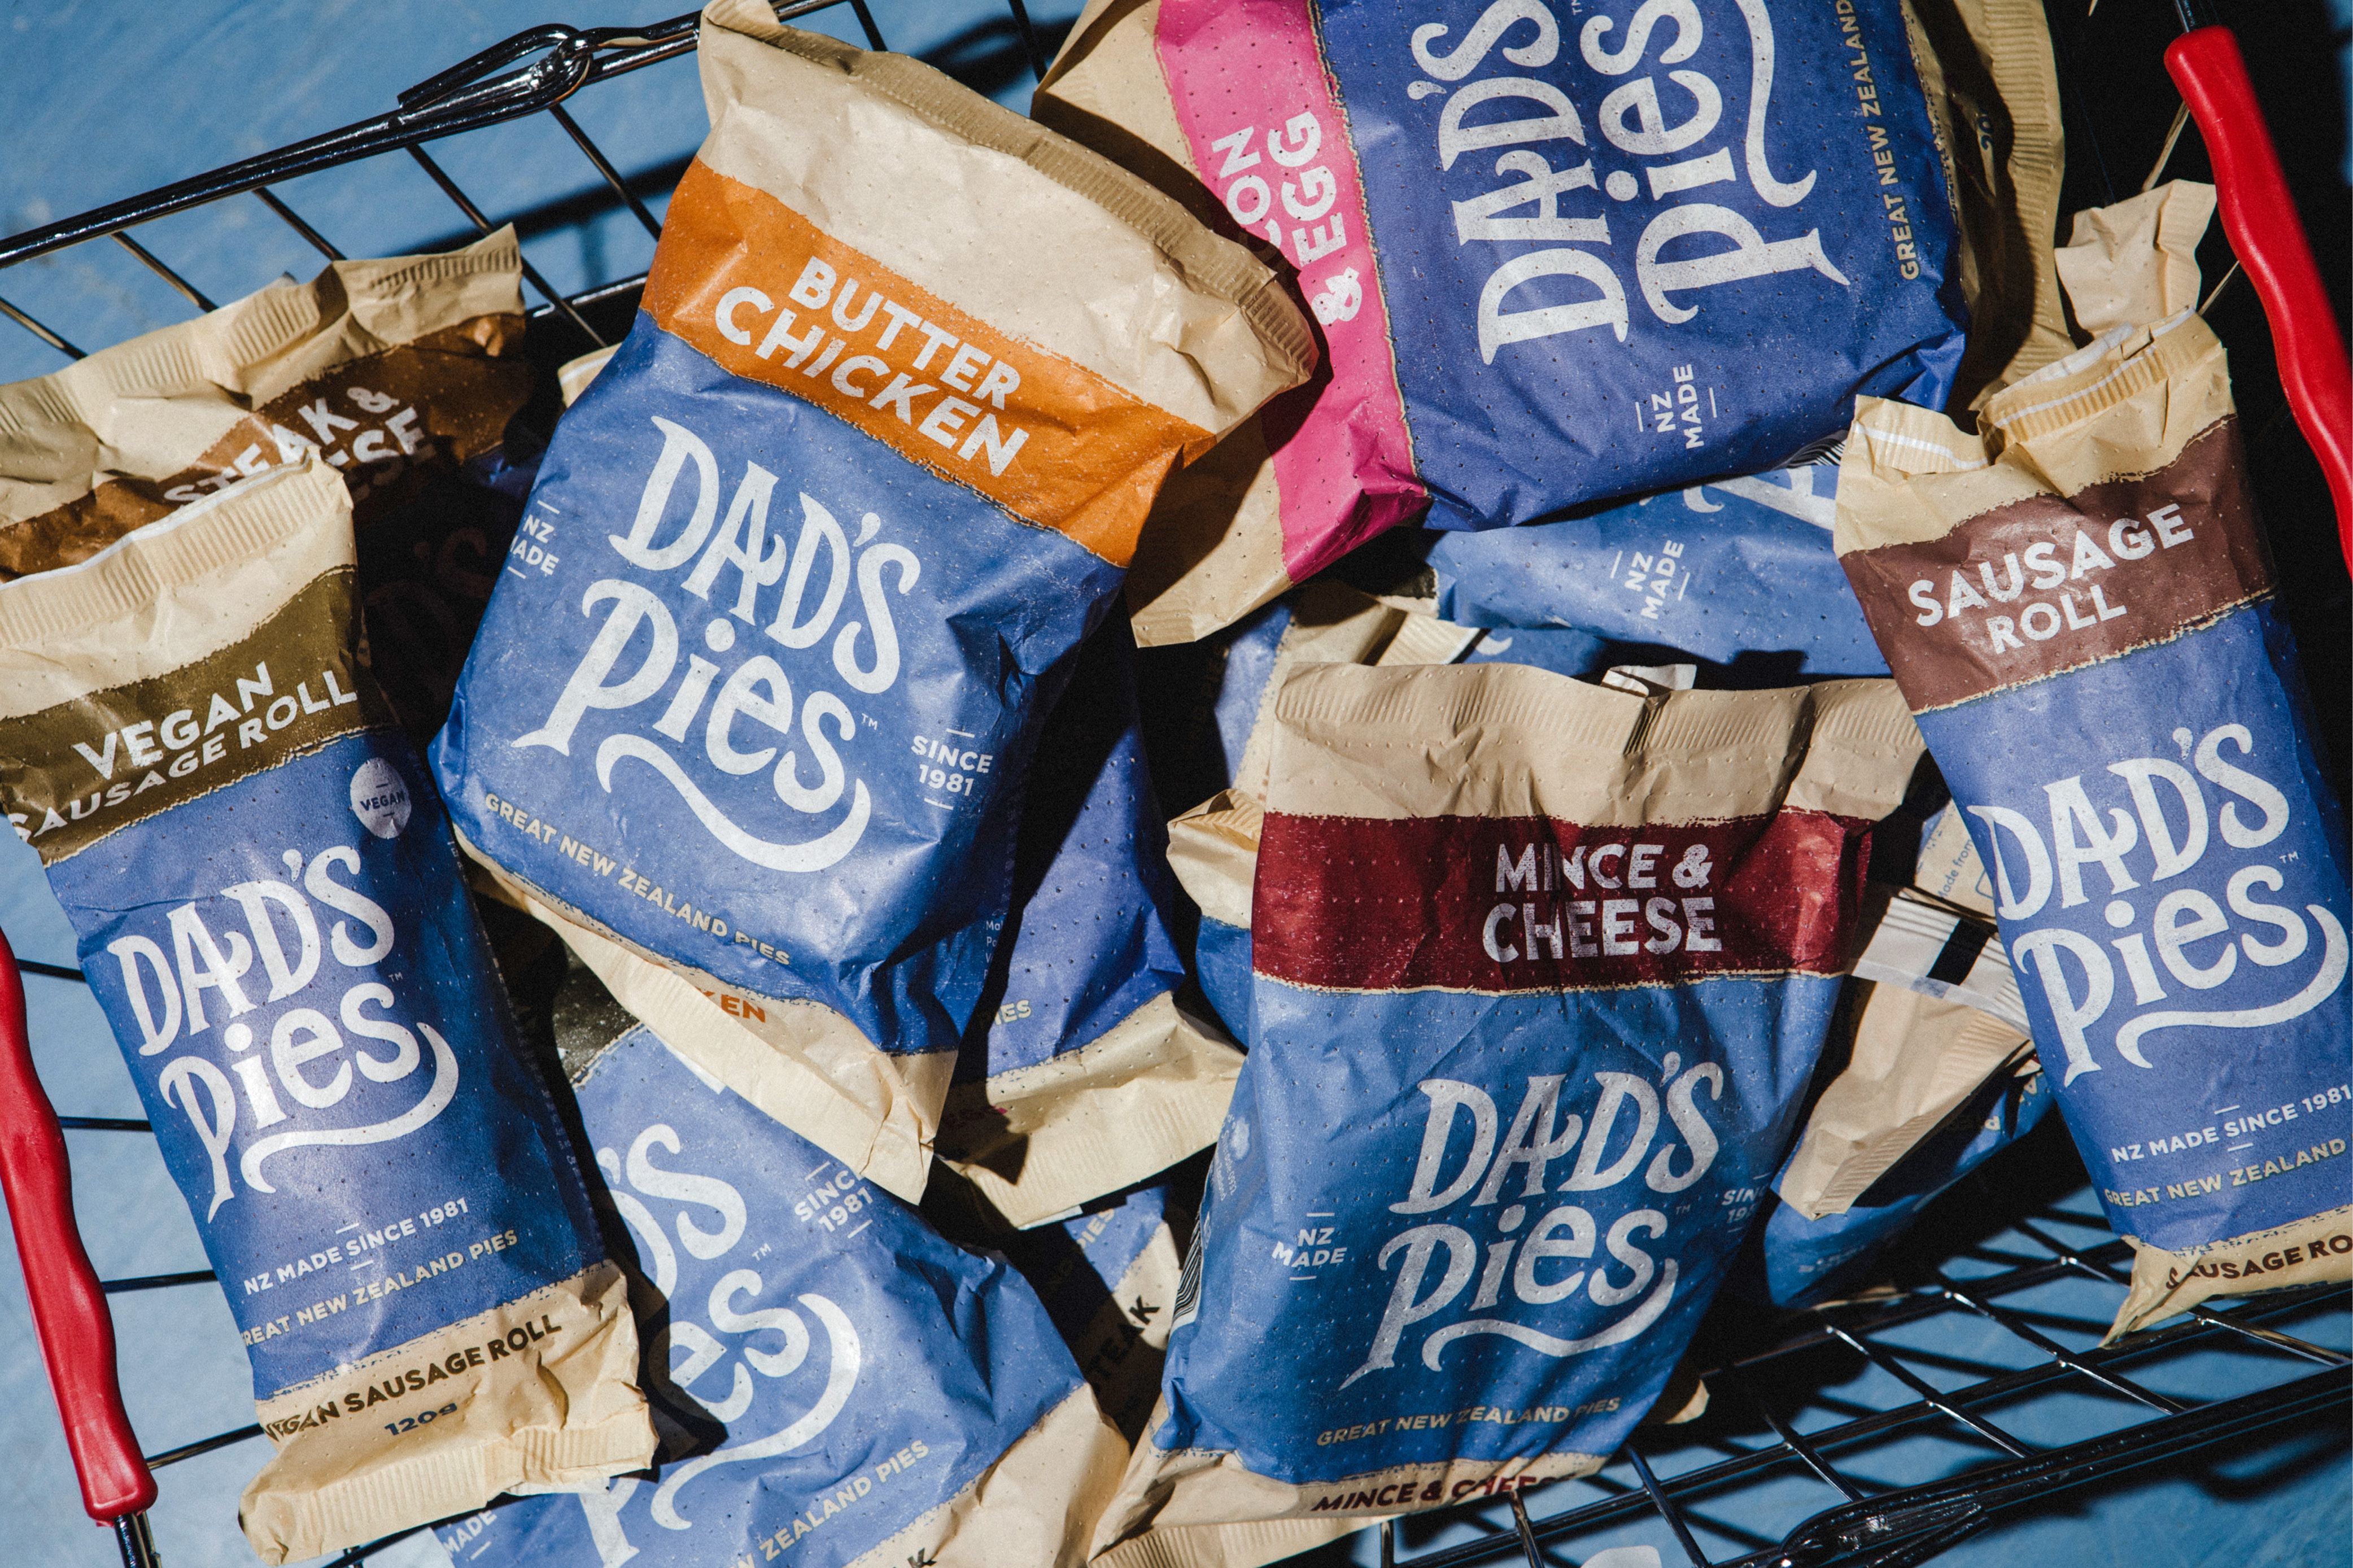 Onfire Design Dads Pies Packaging Design3